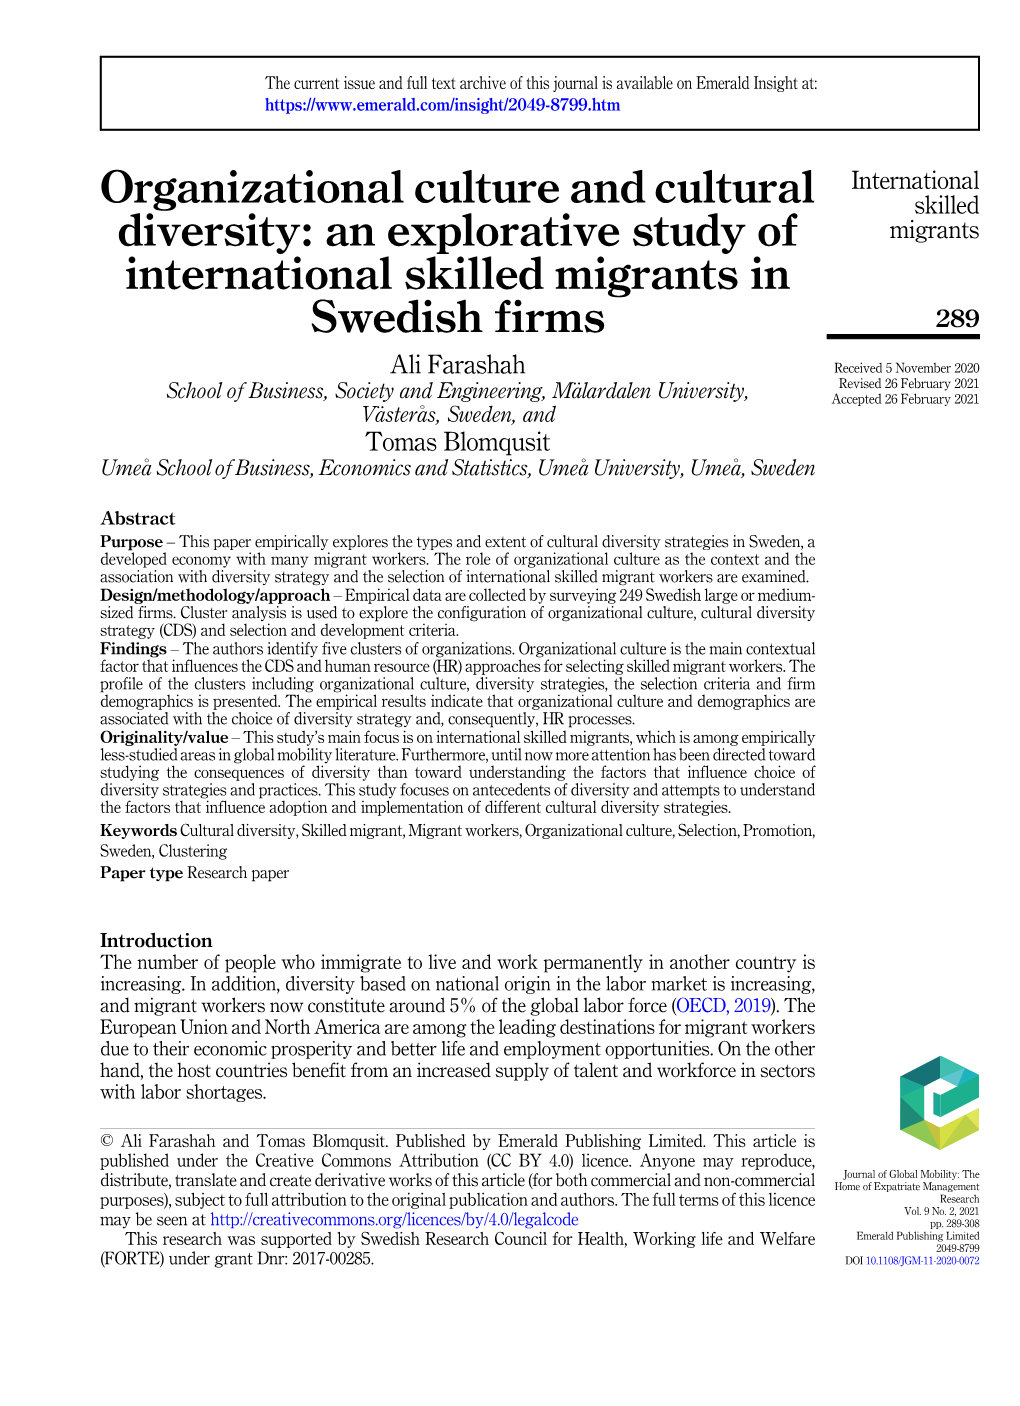 Organizational Culture and Cultural Diversity Strategy (CDS) Is Explored